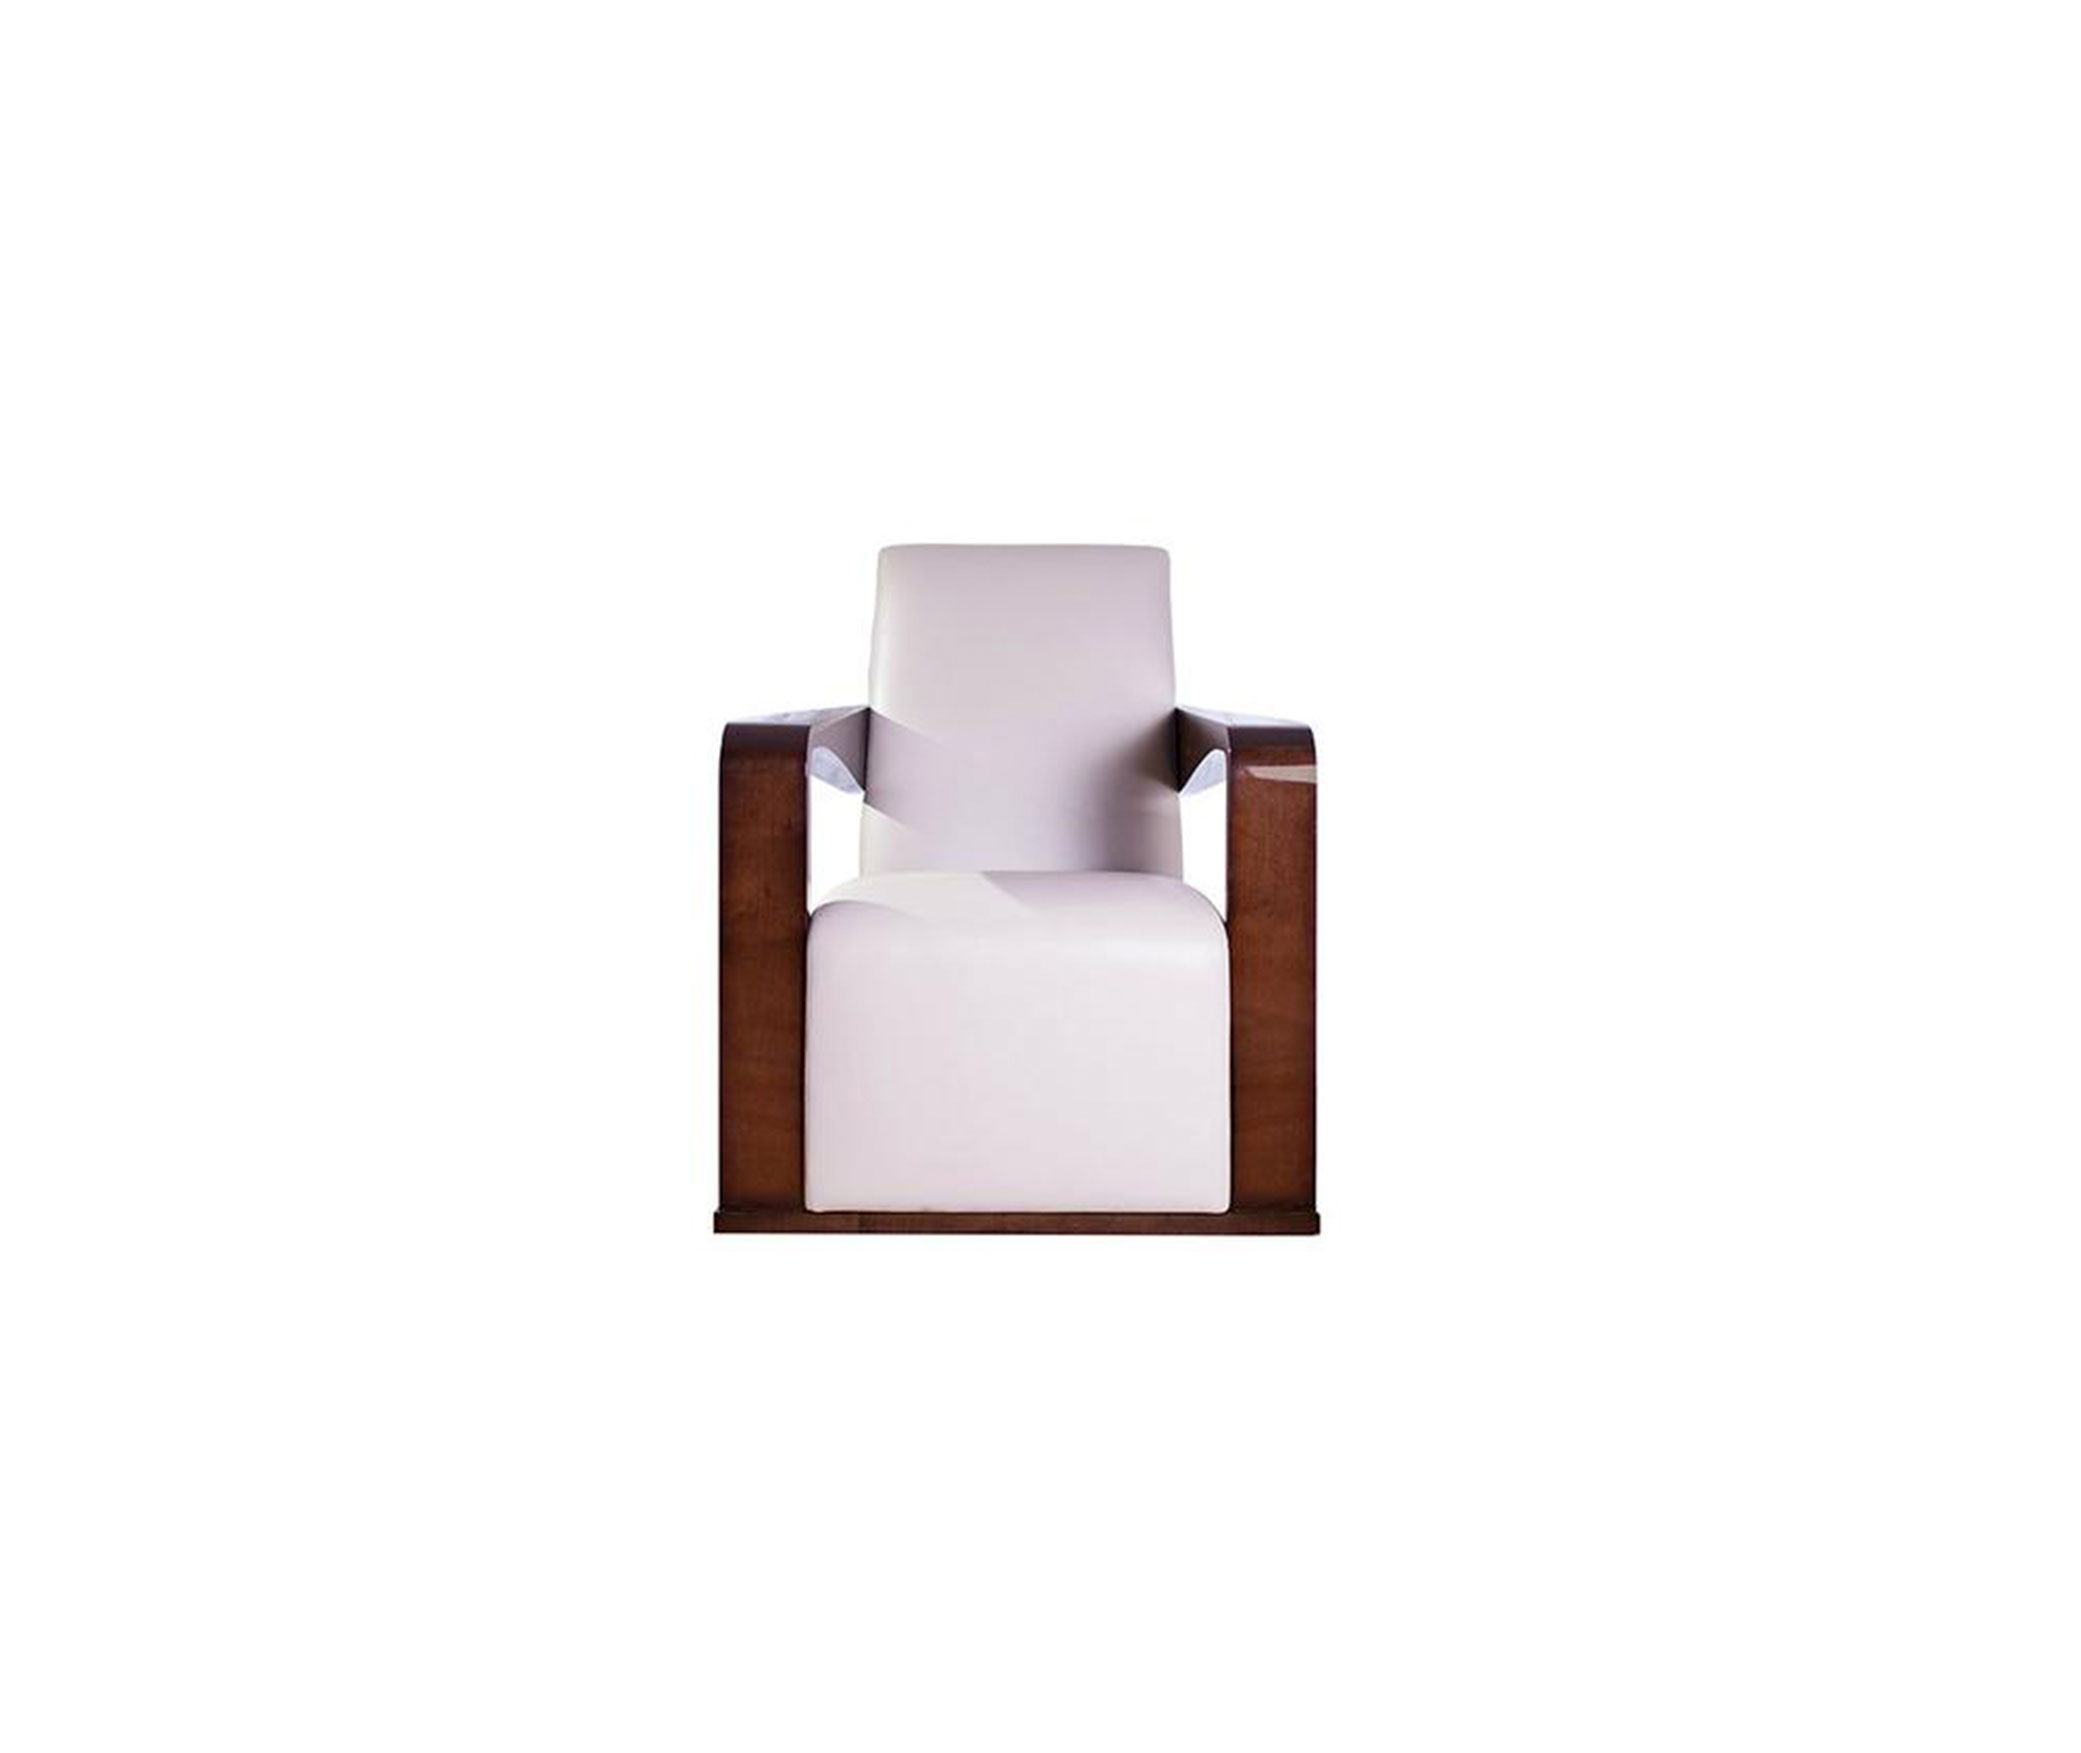 Profiles_Ying-Lounge-Chair-2_int_products